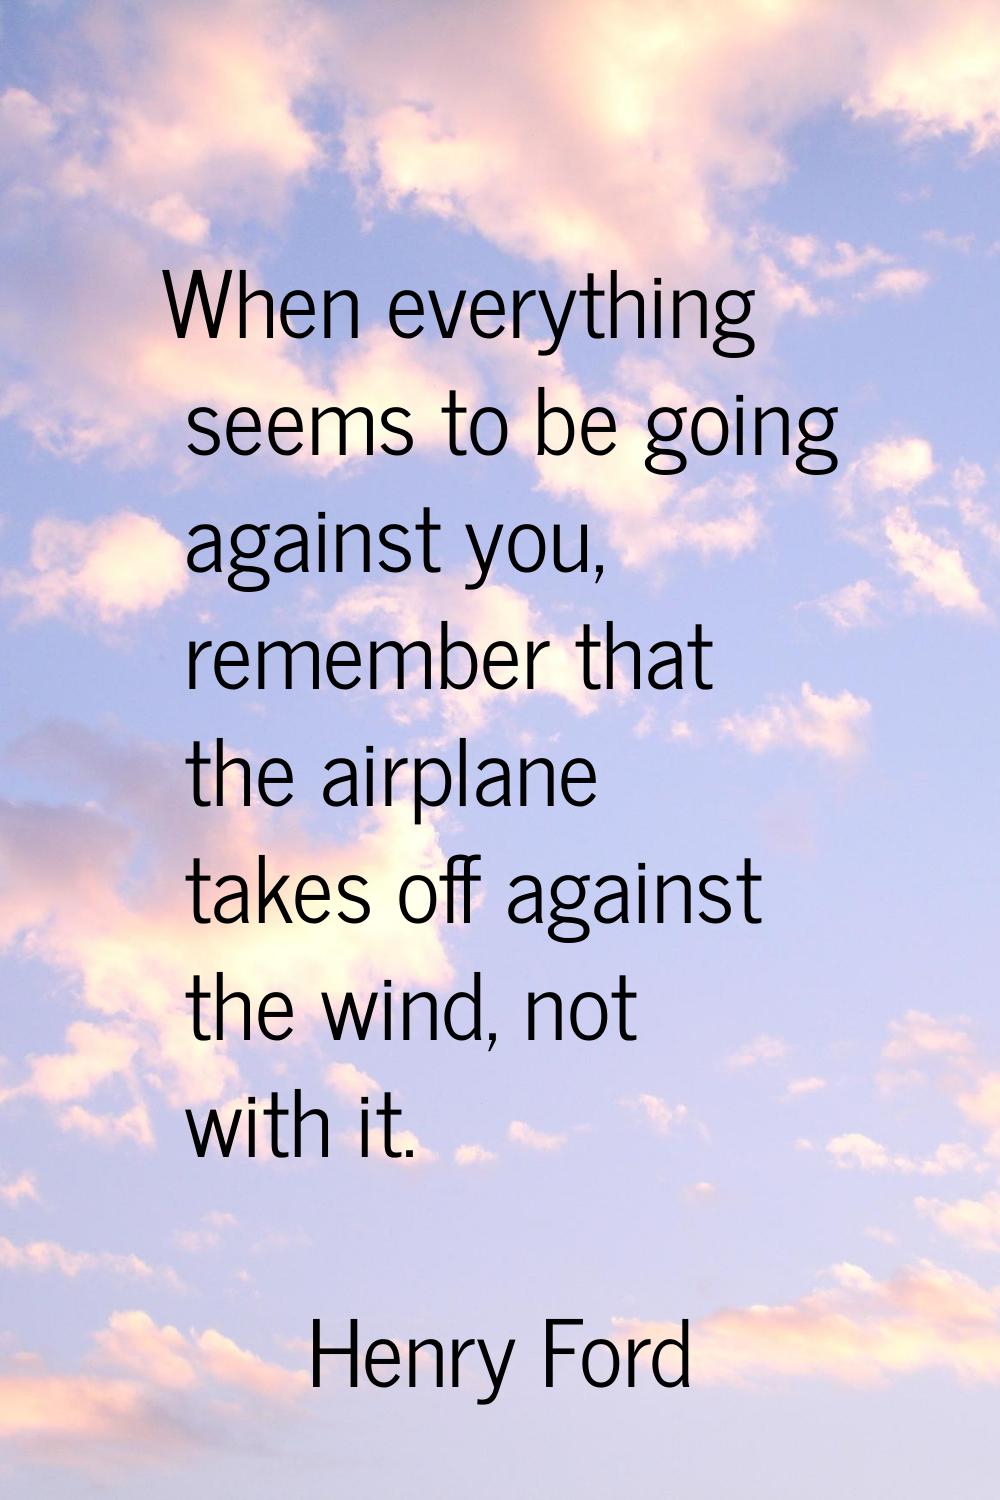 When everything seems to be going against you, remember that the airplane takes off against the win